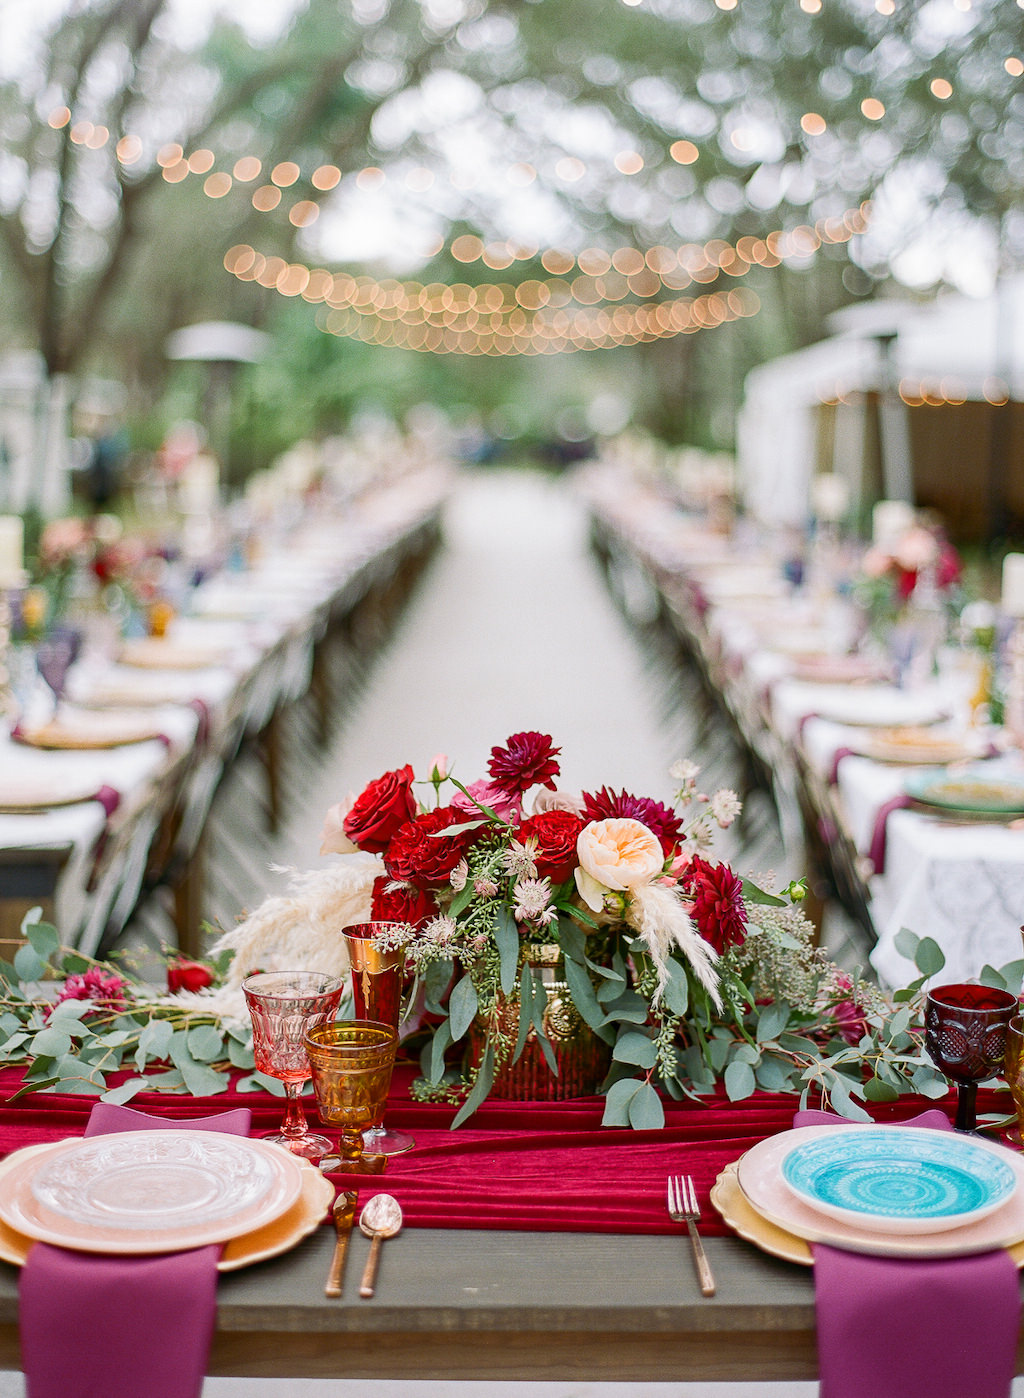 Boho Chic Vintage Wedding Outdoor Lakeland Florida Reception Decor, Sweetheart Table with Red Table Runner, Red Pink and Greenery Floral Centerpiece